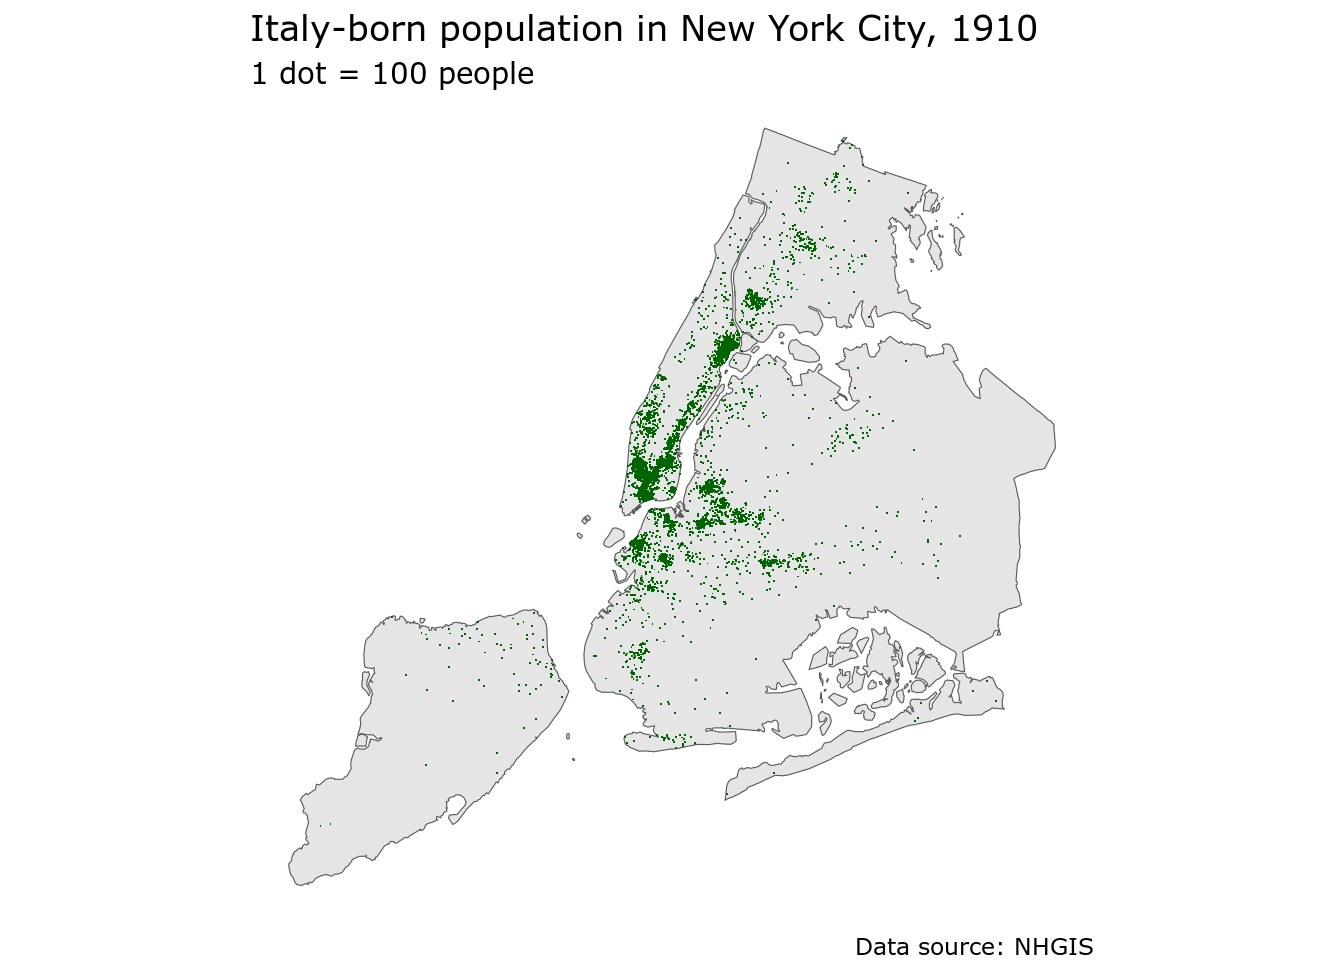 Dot-density map of the Italy-born population in NYC in 1910, mapped with ggplot2